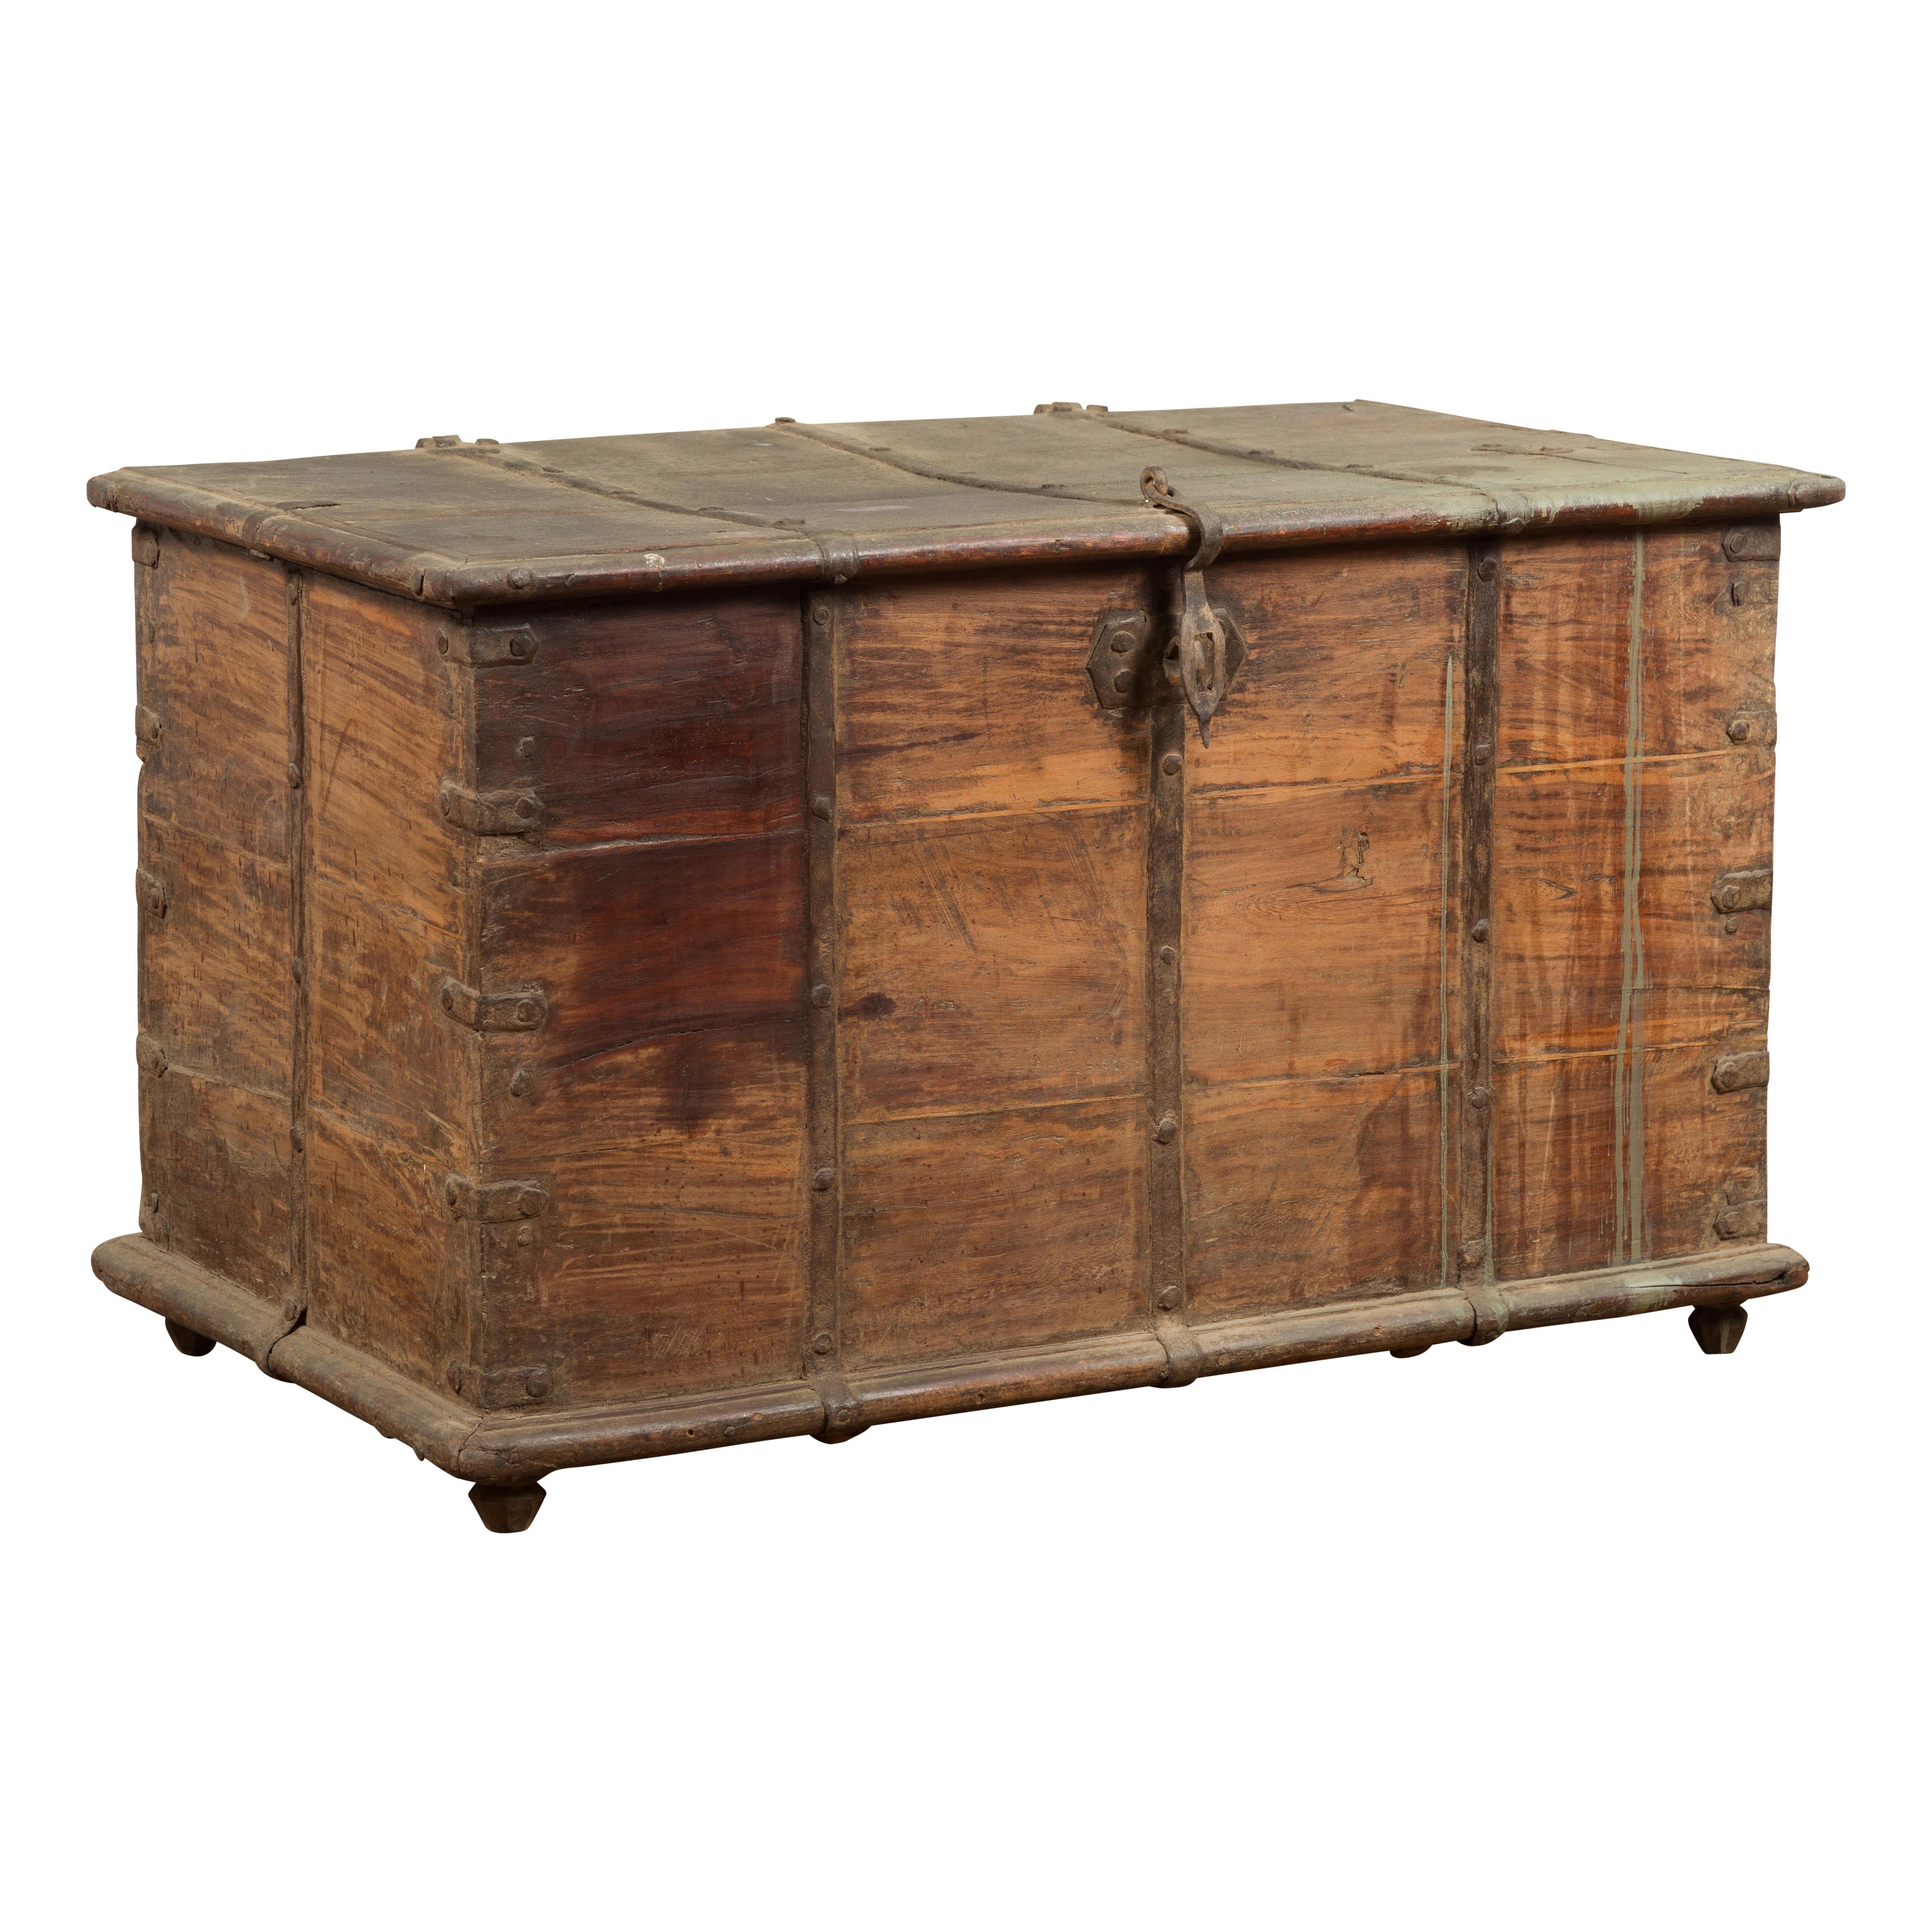 19th Century Blanket Chest with Brass Hardware and Rustic Character For Sale 13